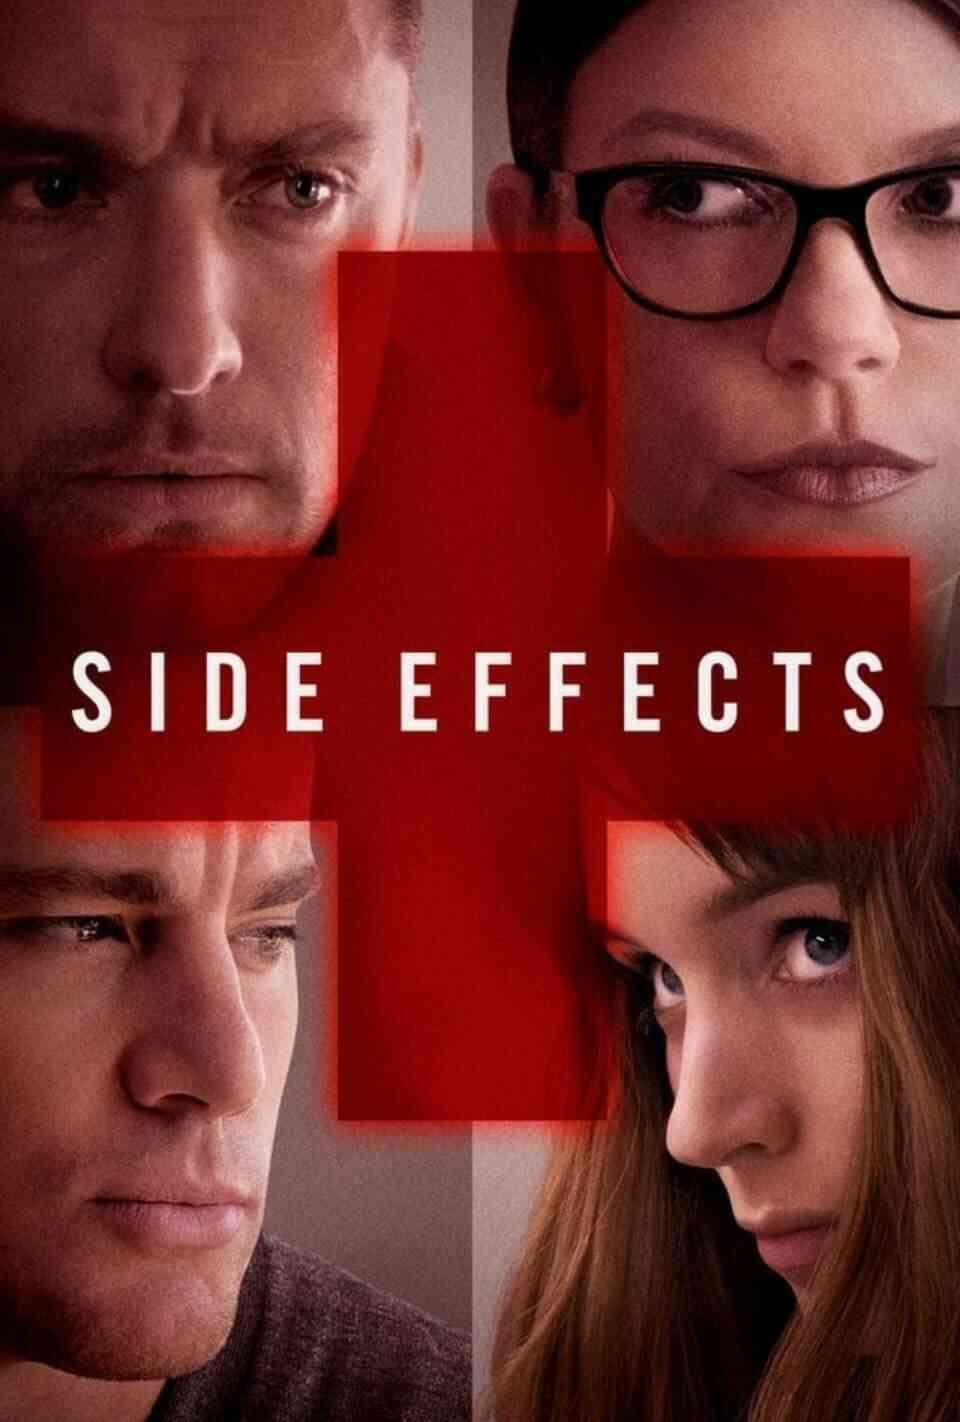 Read Side Effects screenplay (poster)